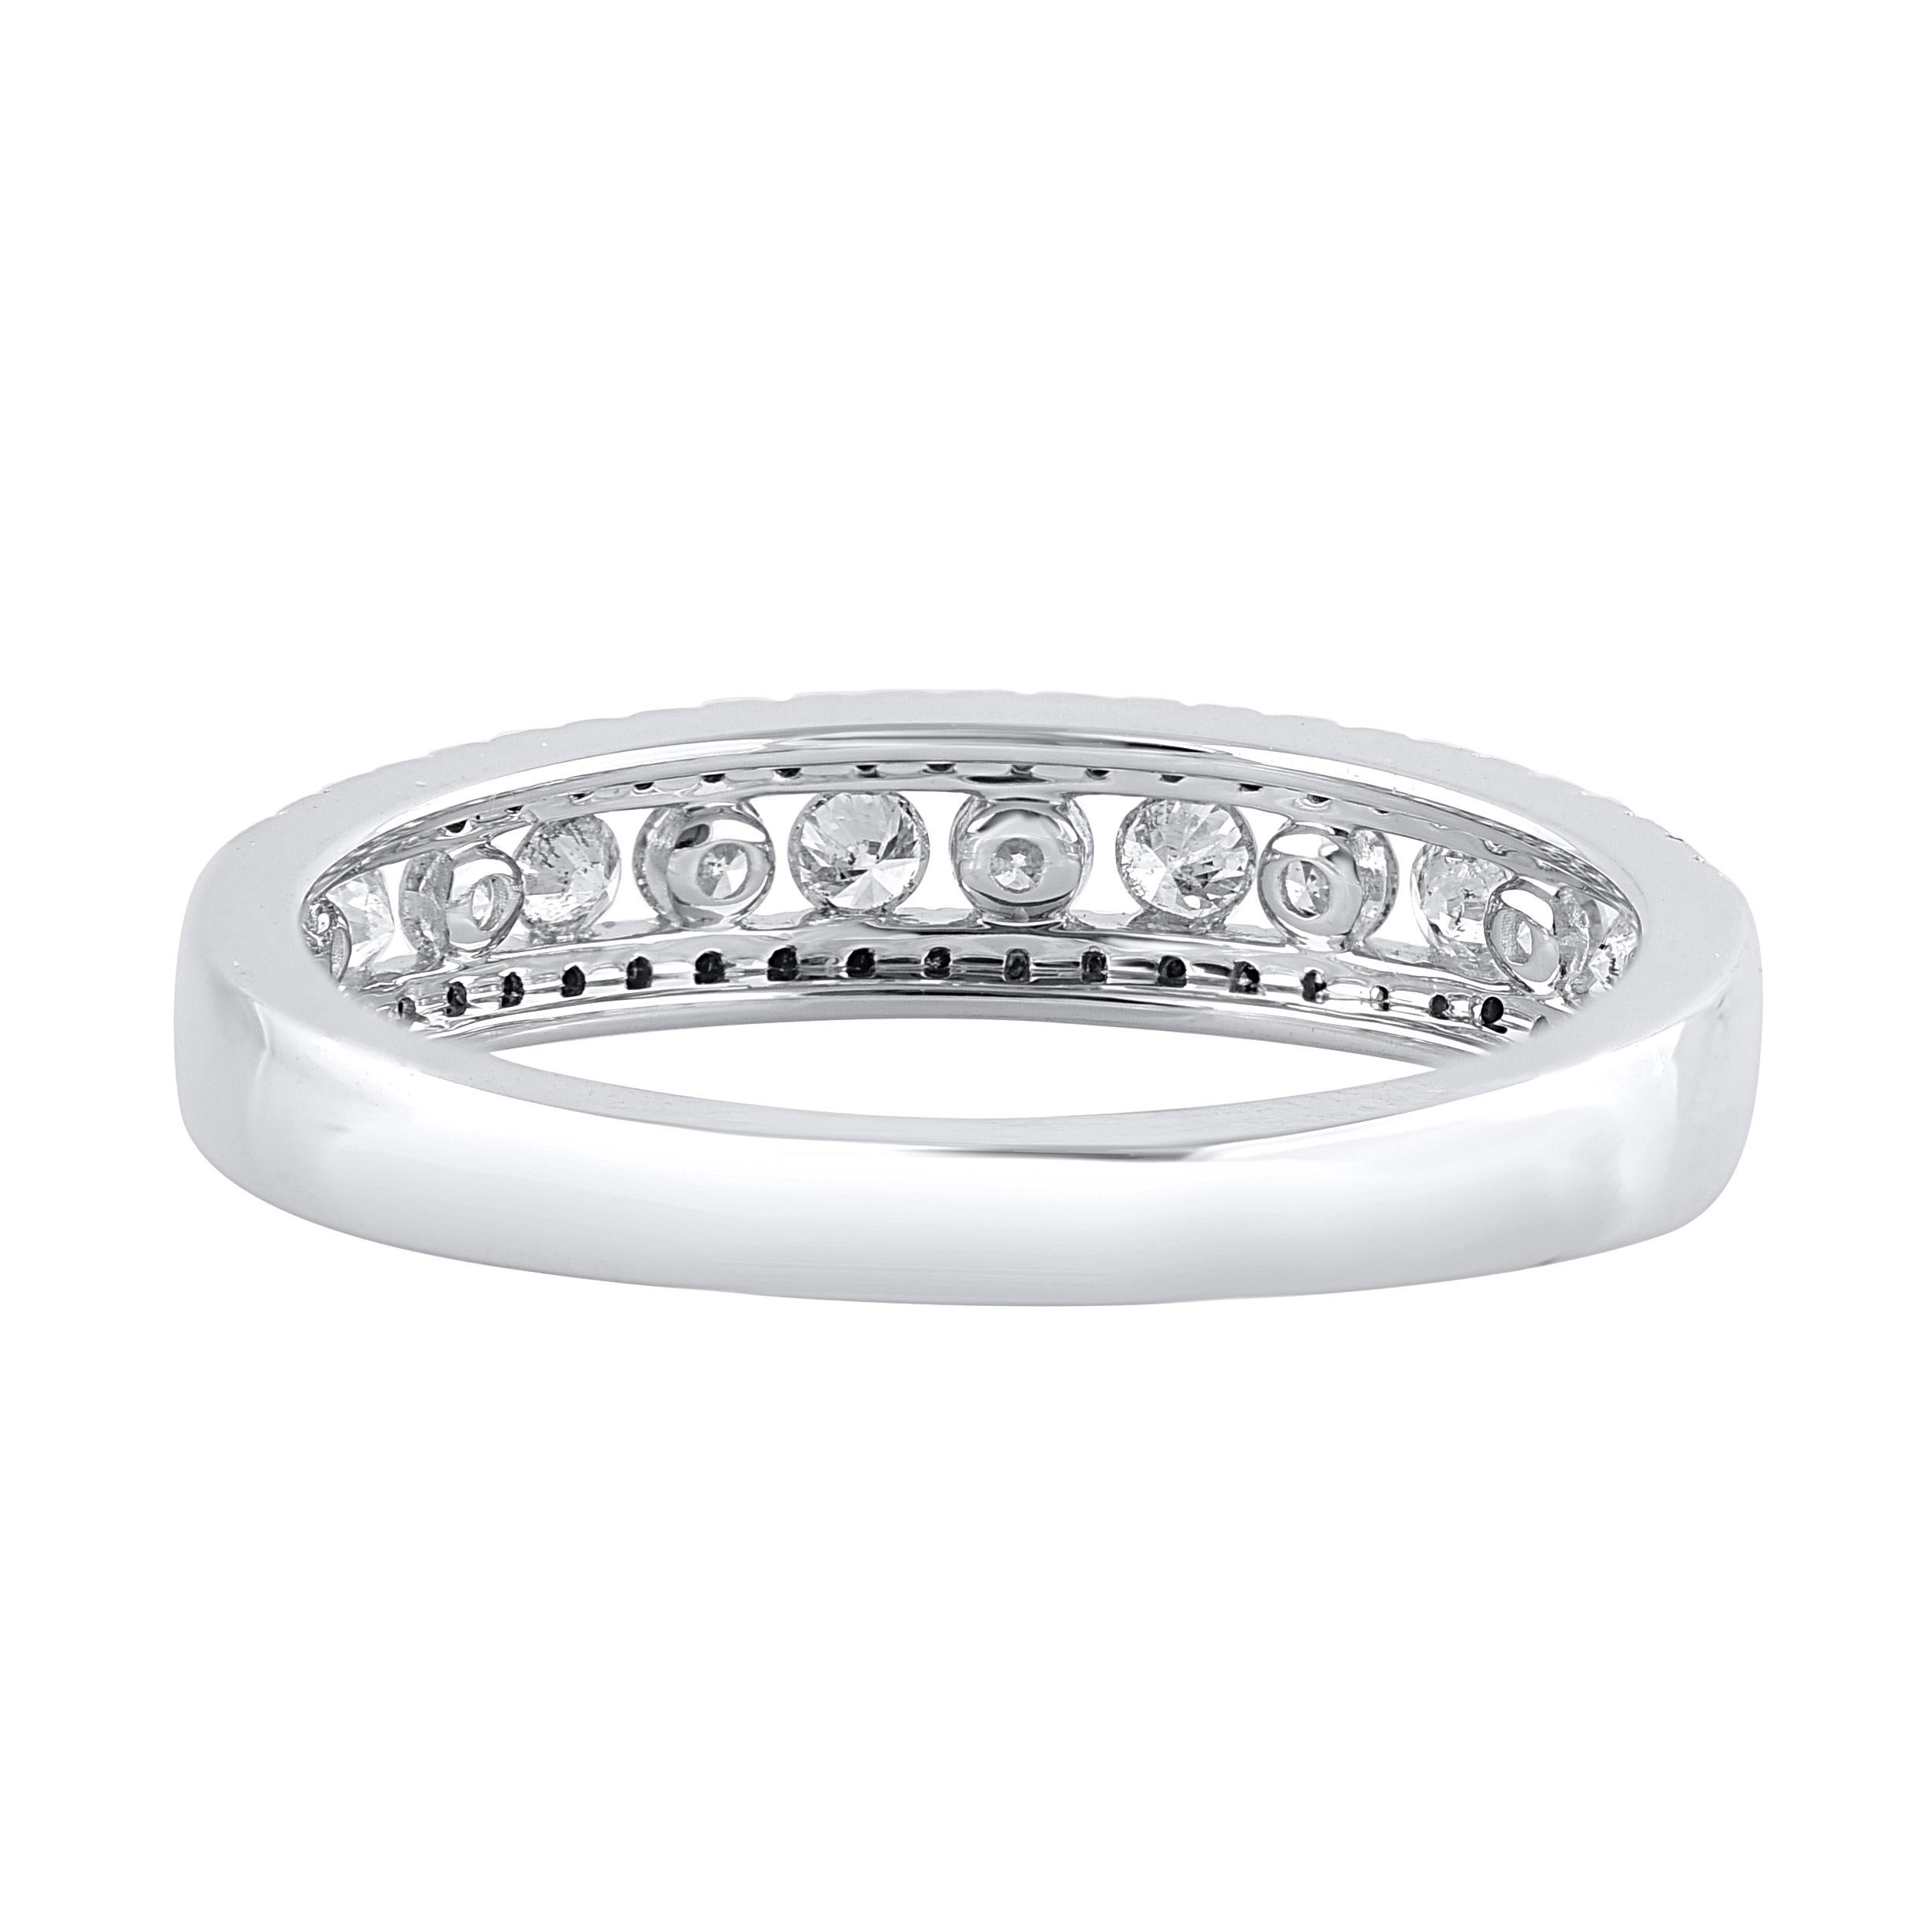 This beautiful stackable band ring features shimmering brilliant cut diamonds and treated black diamond in prong and channel setting. crafted in 14 karat white gold. The ring is studded with a total of 59 brilliant cut natural round diamonds and the